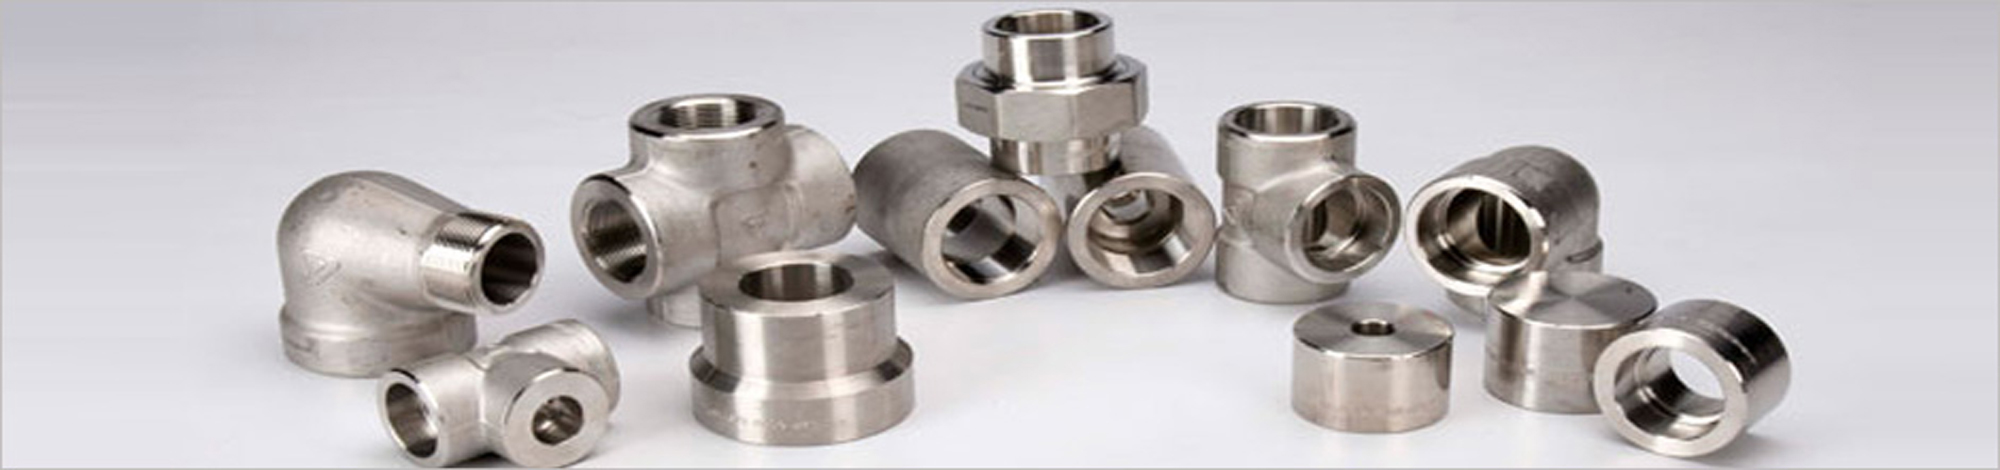 Monel K500 Forged Fittings supplier